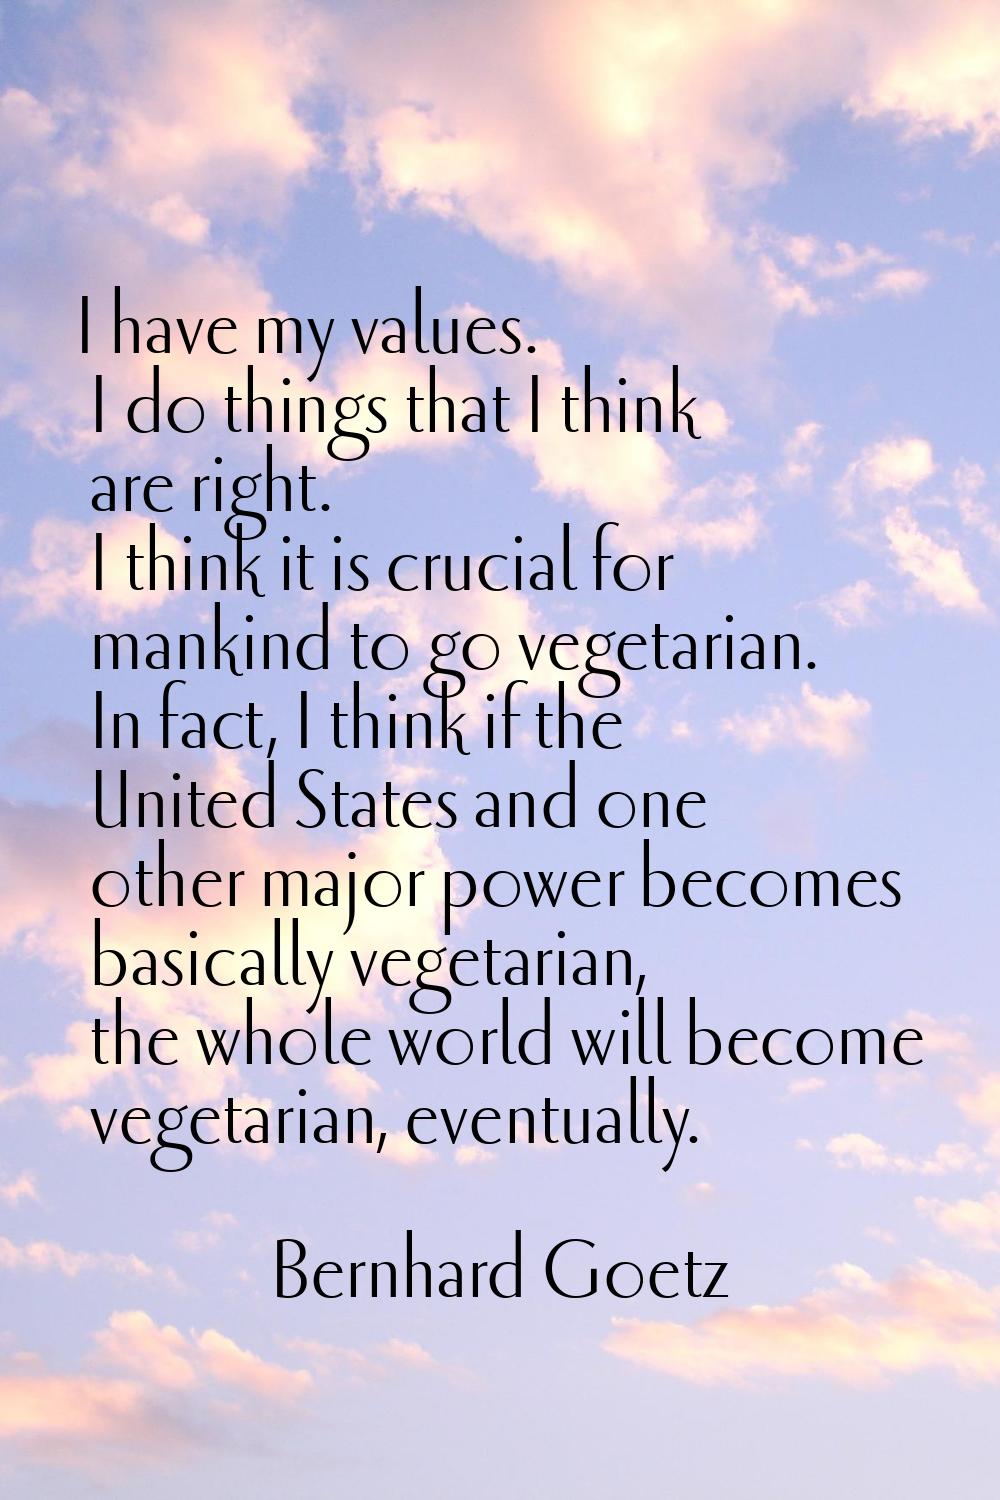 I have my values. I do things that I think are right. I think it is crucial for mankind to go veget